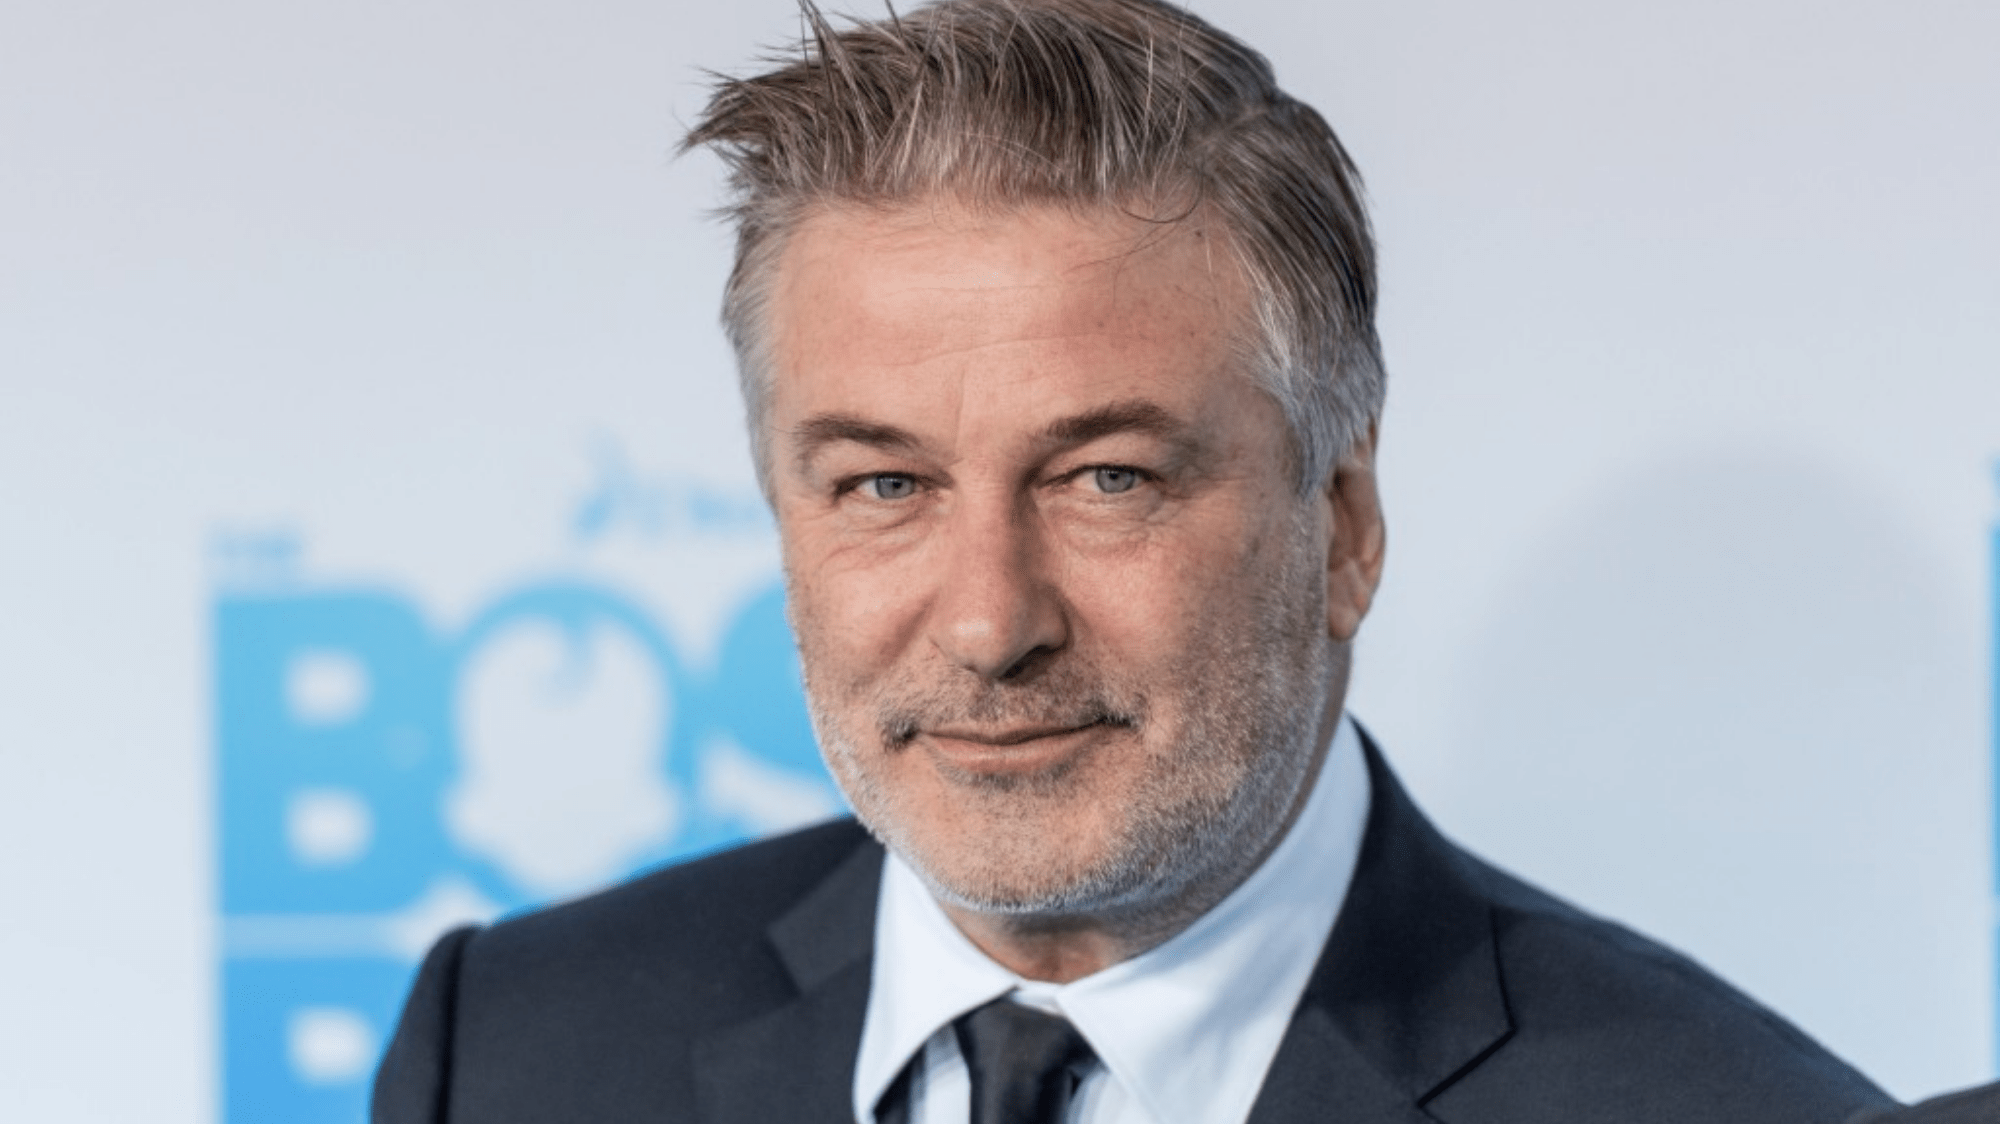 Alec Baldwin will not attend court for preliminary hearing in Rust case as judge grants actor’s motion to waive appearance